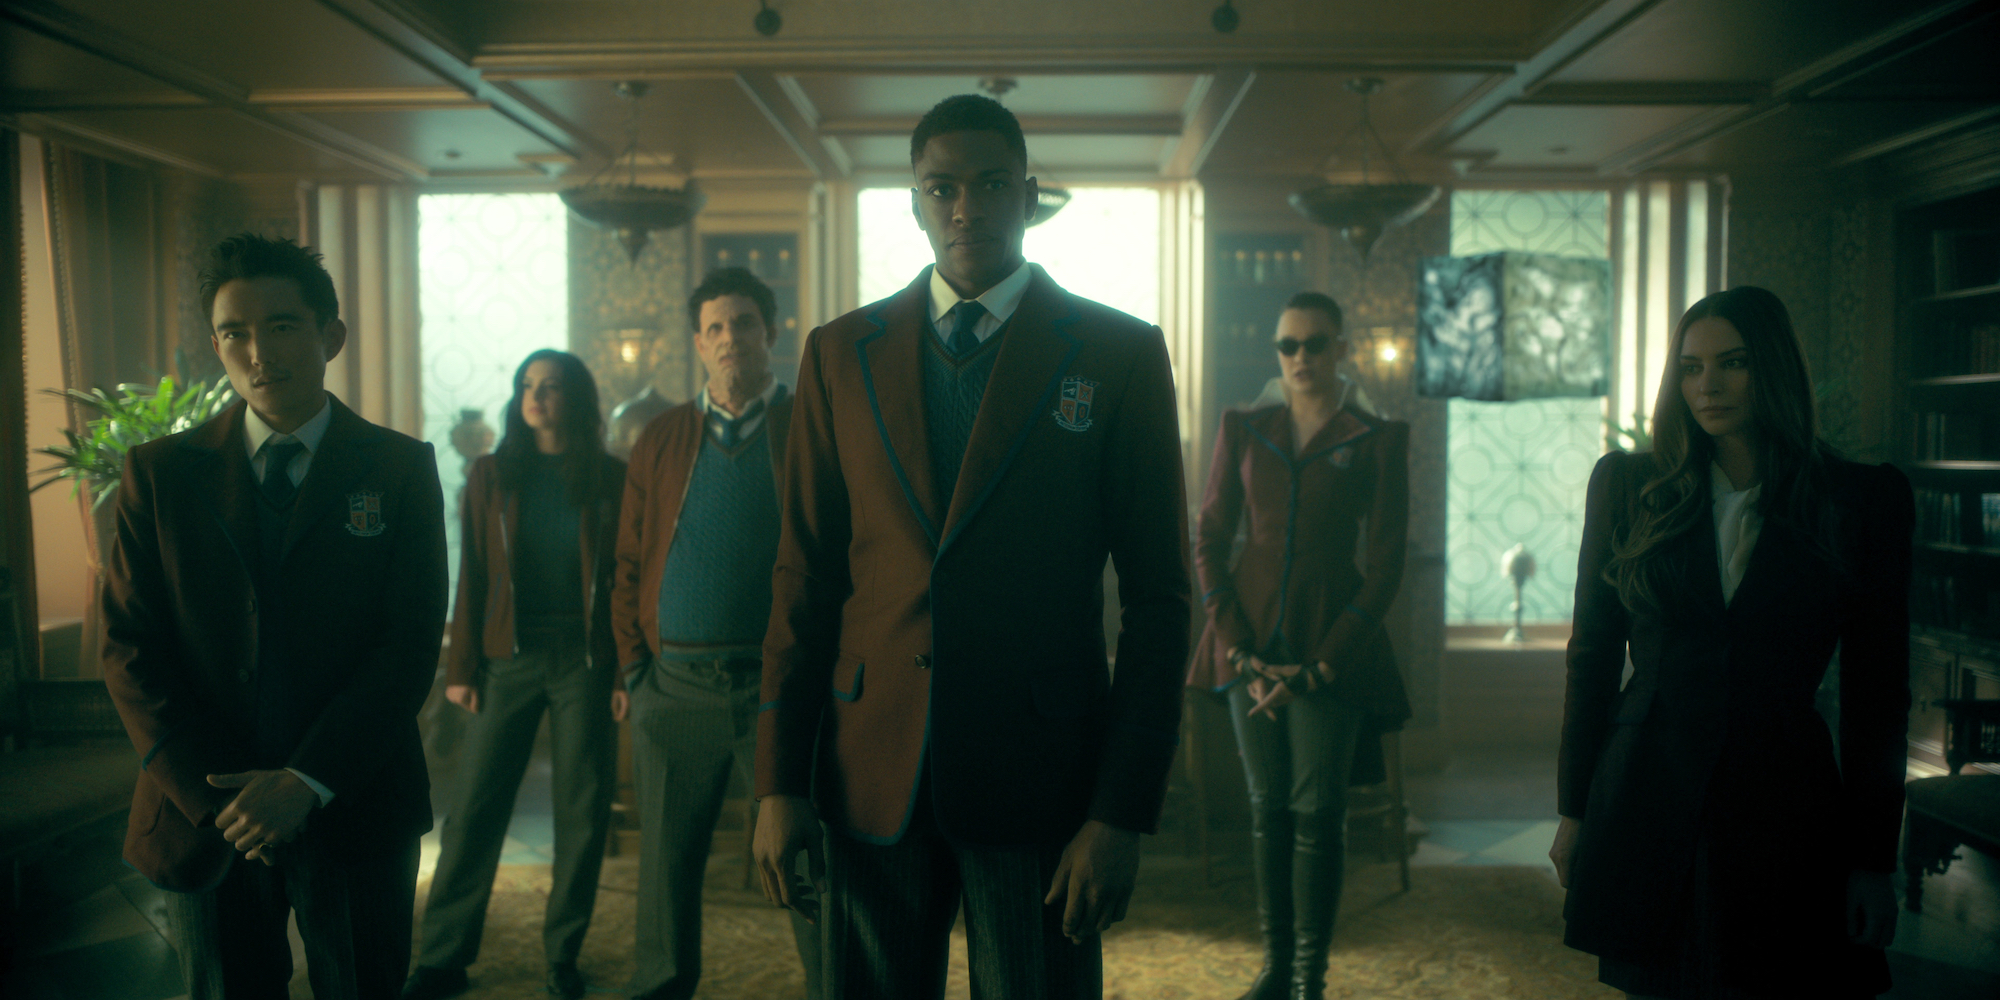 'The Umbrella Academy' Season 3 will feature The Sparrow Academy, seen here standing in a group with burgundy jackets on.